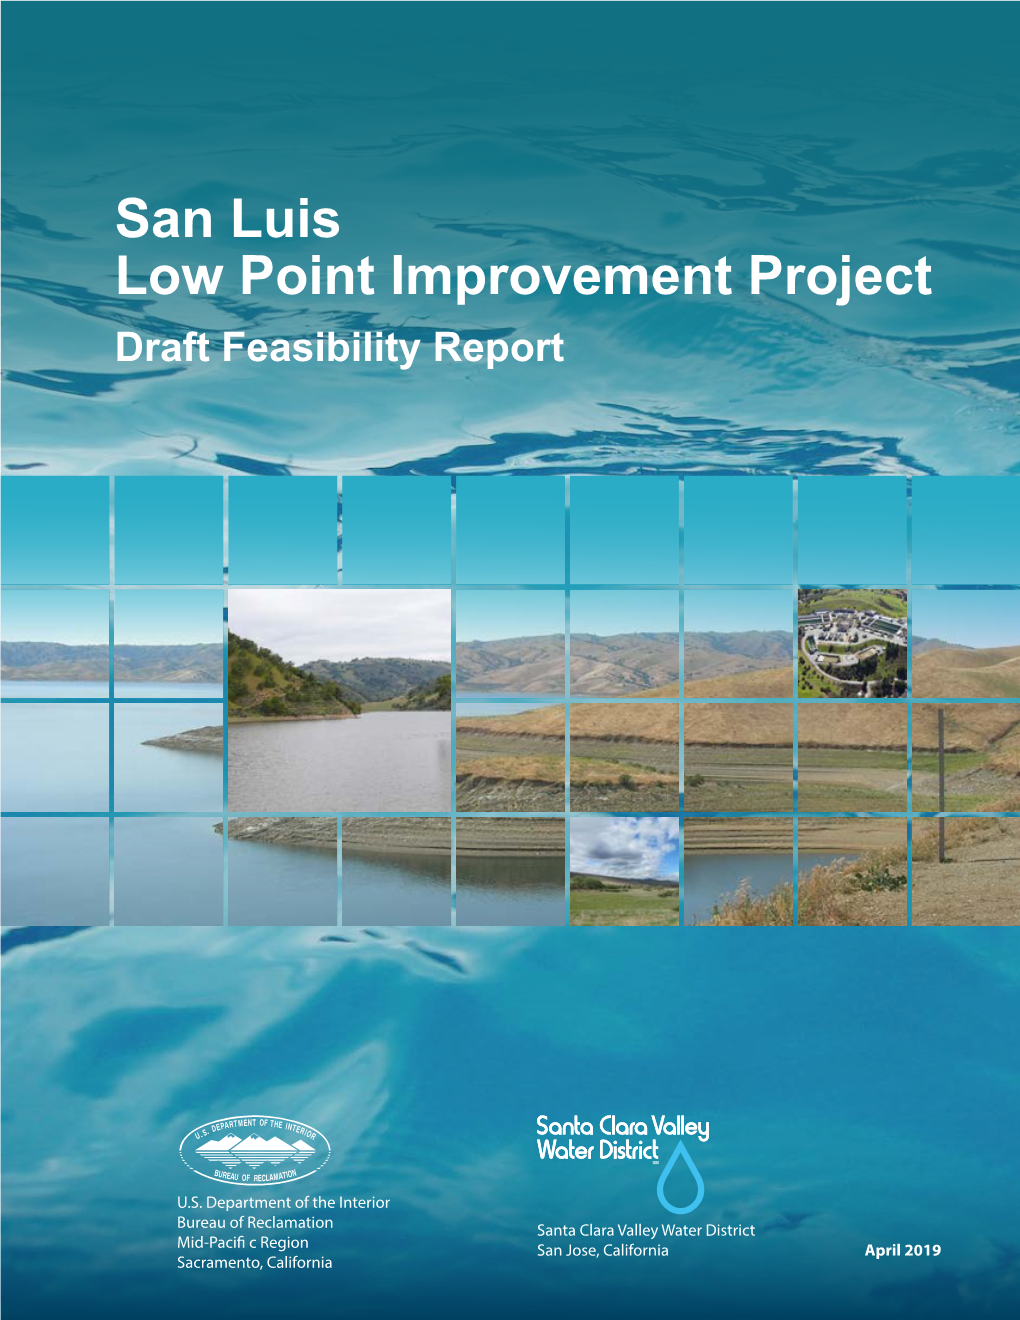 San Luis Low Point Improvement Project Draft Feasibility Report